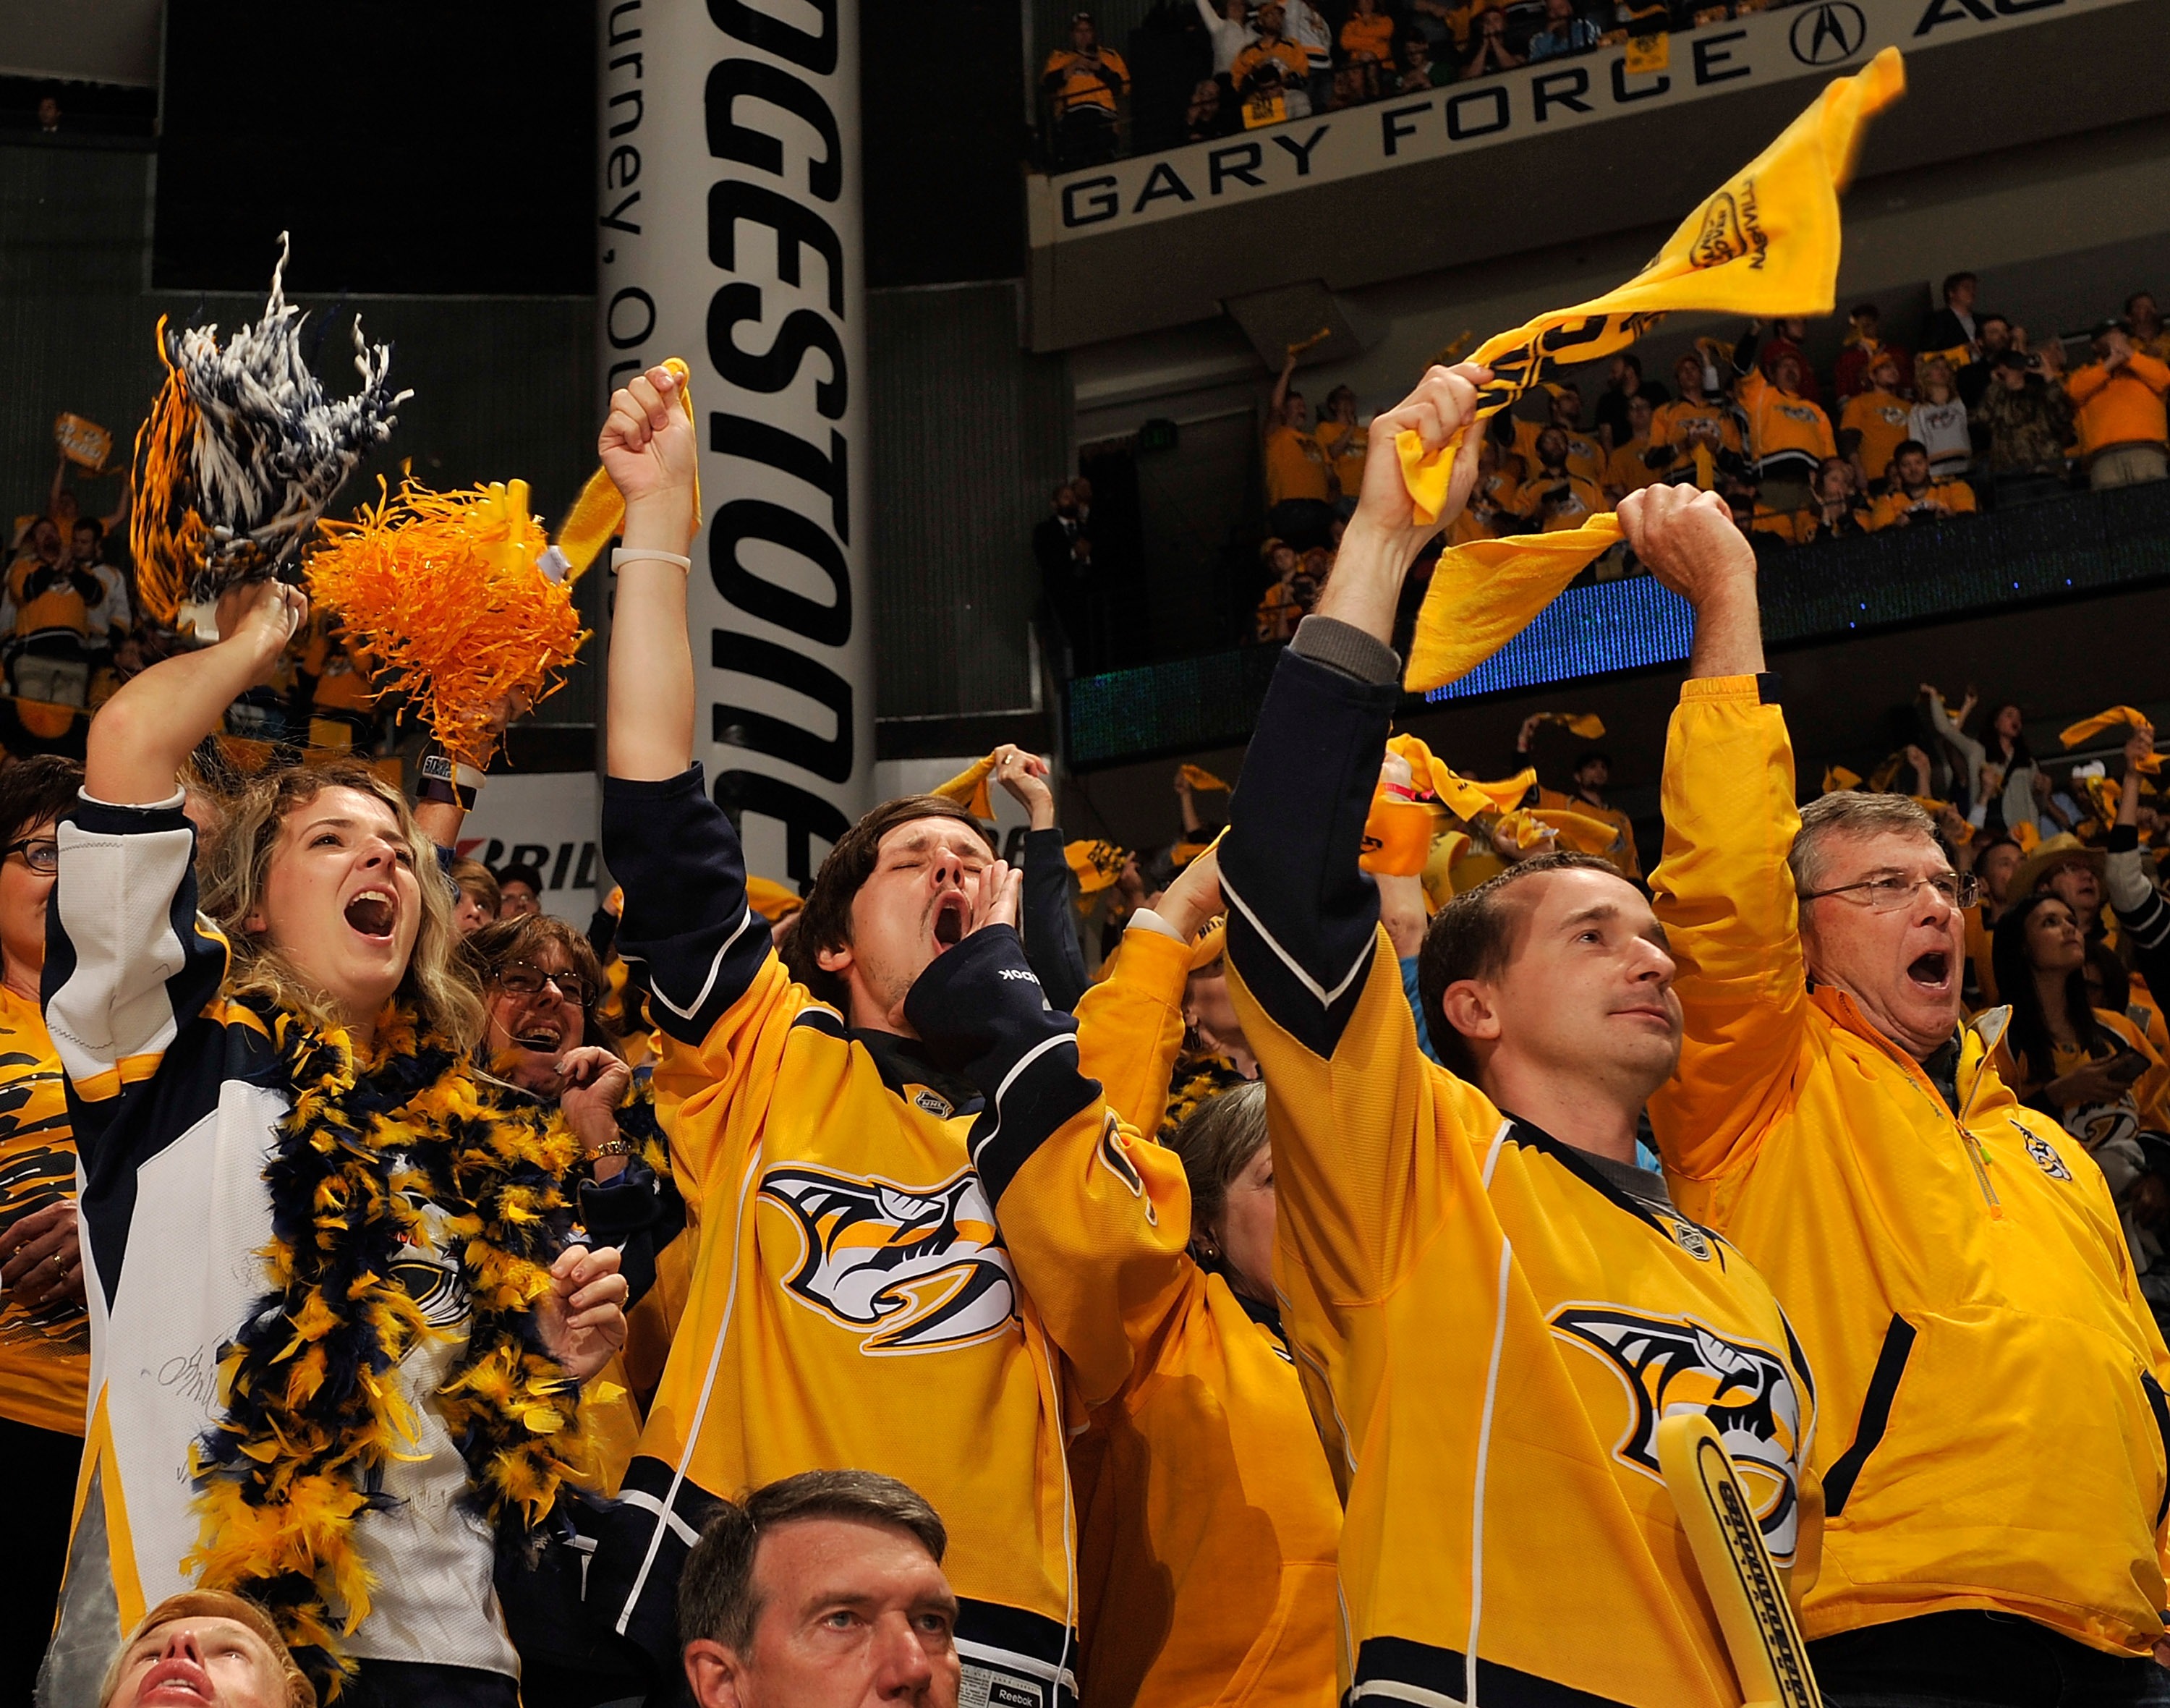 NASHVILLE, TN - APRIL 20: Fans of the Nashville Predators cheer during the second period against the Chicago Blackhawks in Game Four of the Western Conference First Round during the 2017 NHL Stanley Cup Playoffs at Bridgestone Arena on April 20, 2017 in Nashville, Tennessee. (Photo by Frederick Breedon/Getty Images)